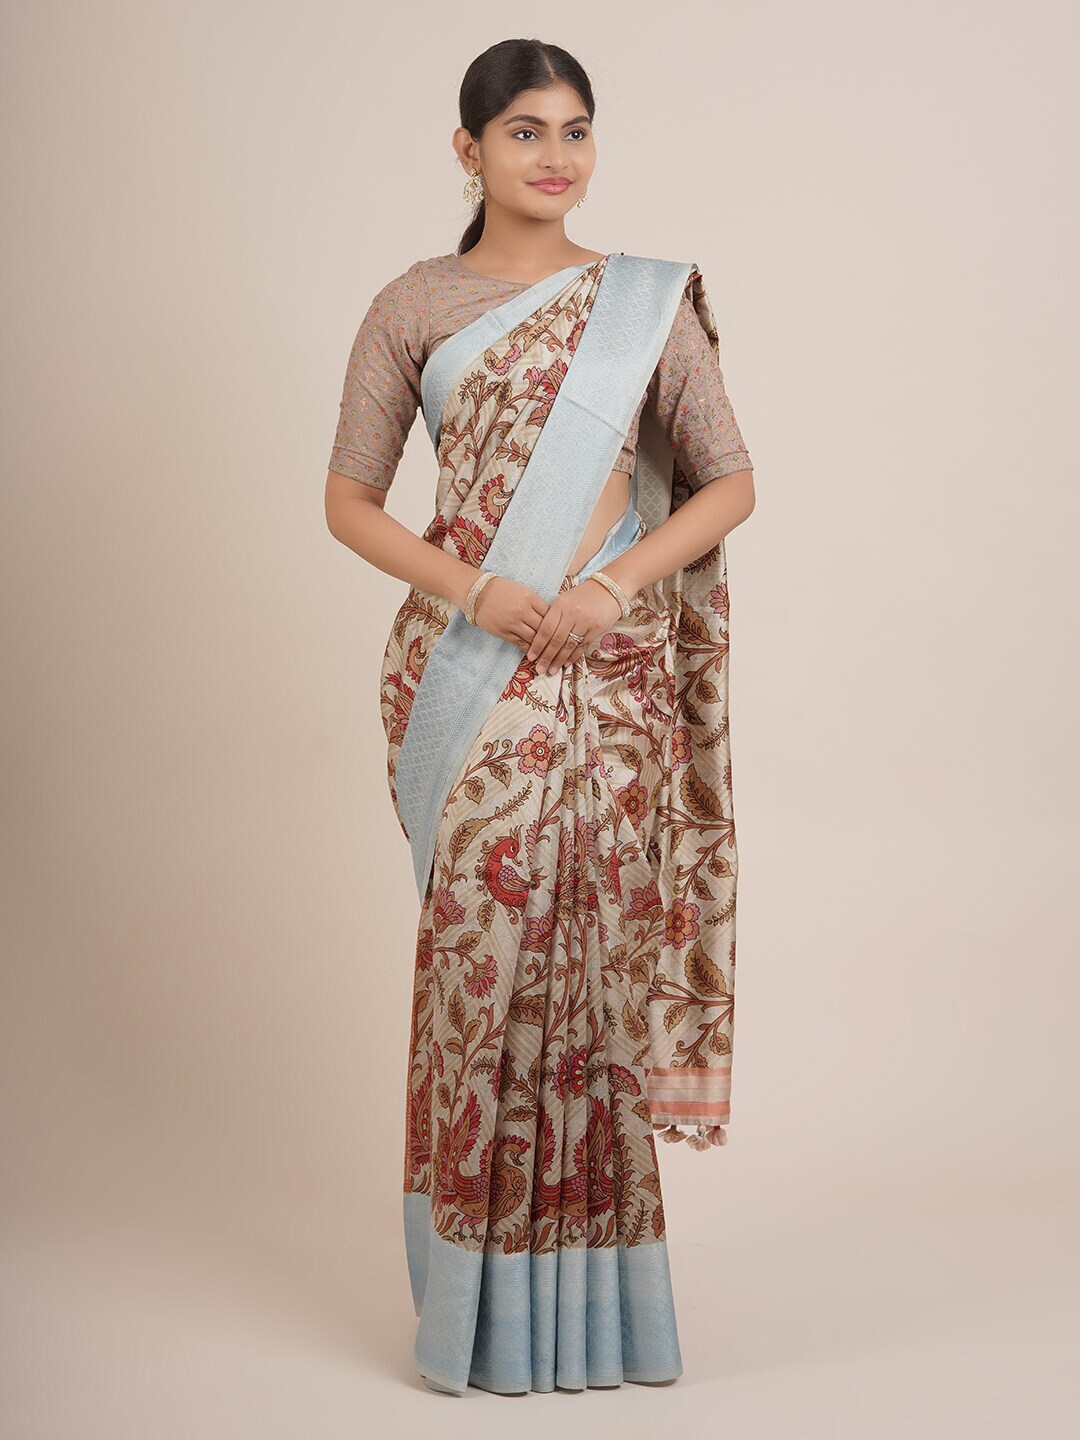 Pothys Beige & Pink Floral Pure Silk Saree Price in India